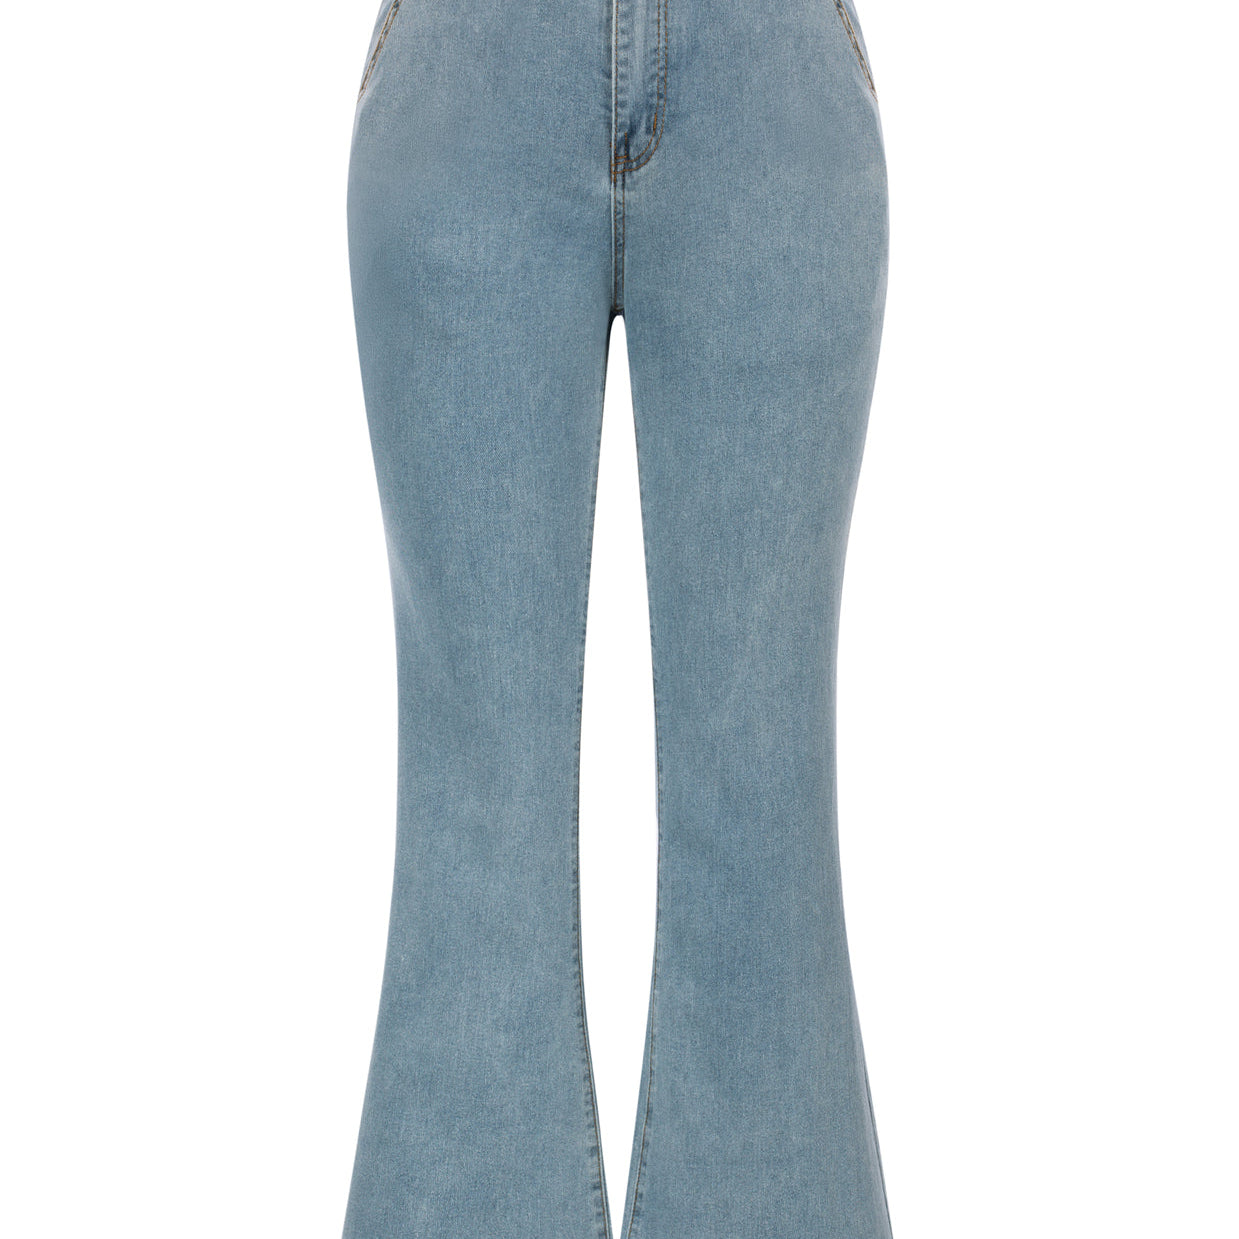 Seckill Offer⌛Vintage High Waisted Flare Jeans with Belt Bootcut Stretchy Denim Pants